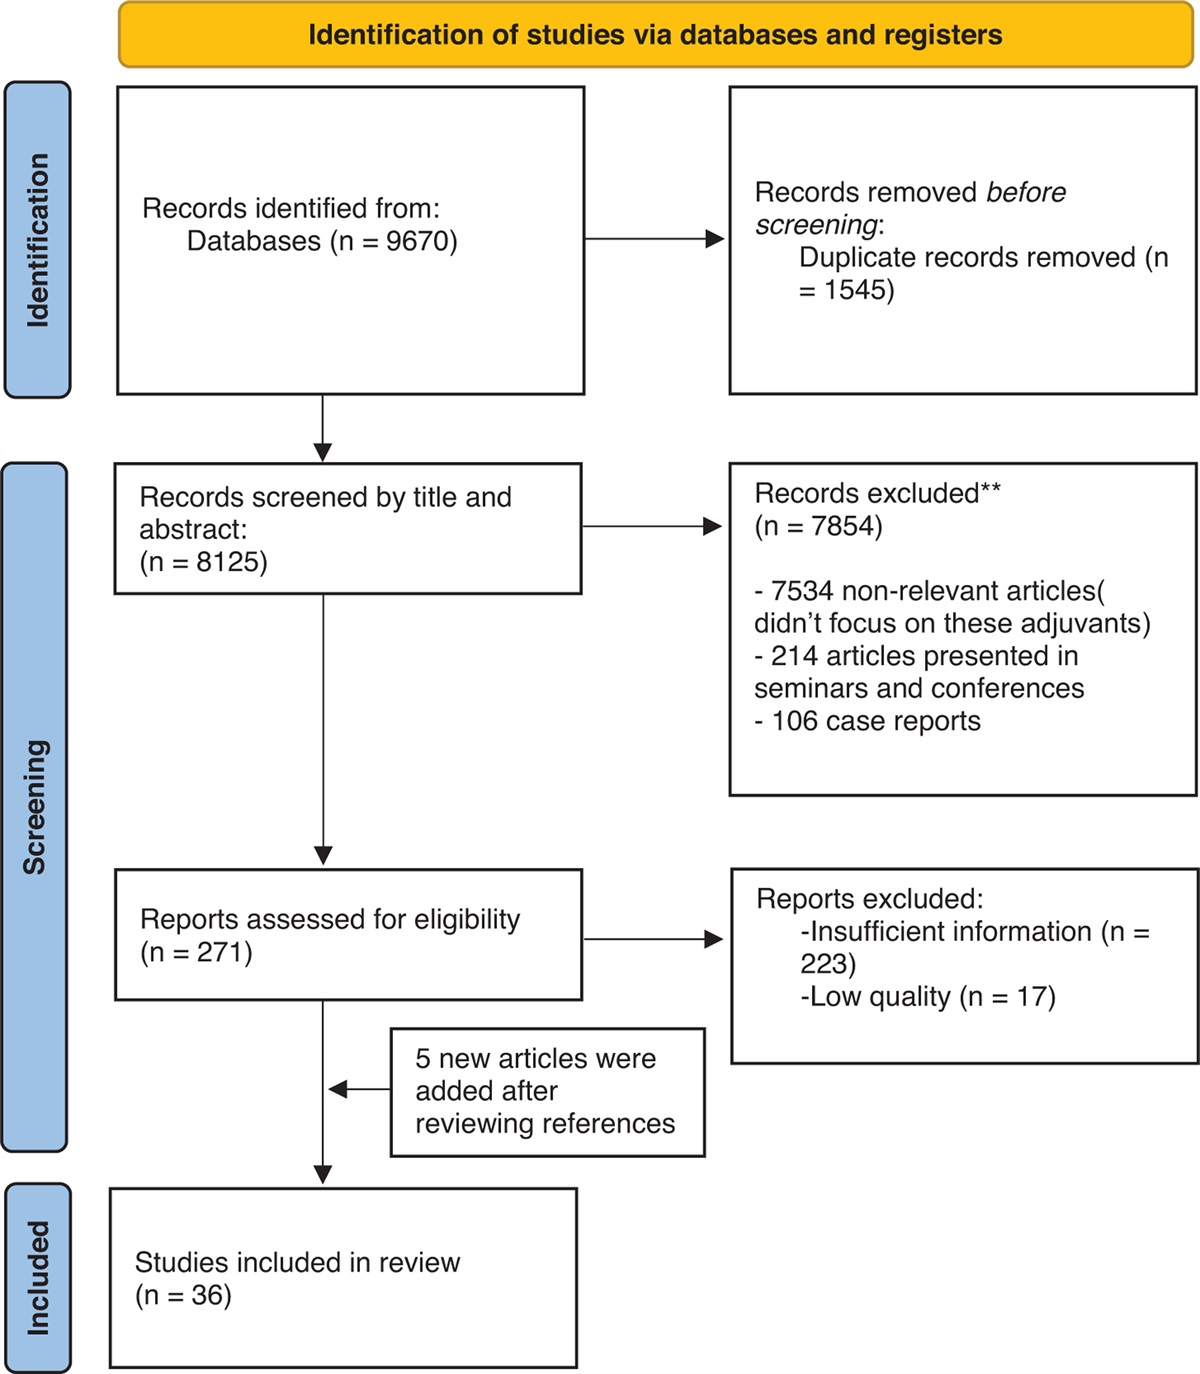 Effects of adjuvants (granulocyte-macrophage colony-stimulating factor, levamisole, adjuvant system 04, adjuvant system 02B) on enhancing immune response to hepatitis B vaccine: a systematic review and meta-analysis